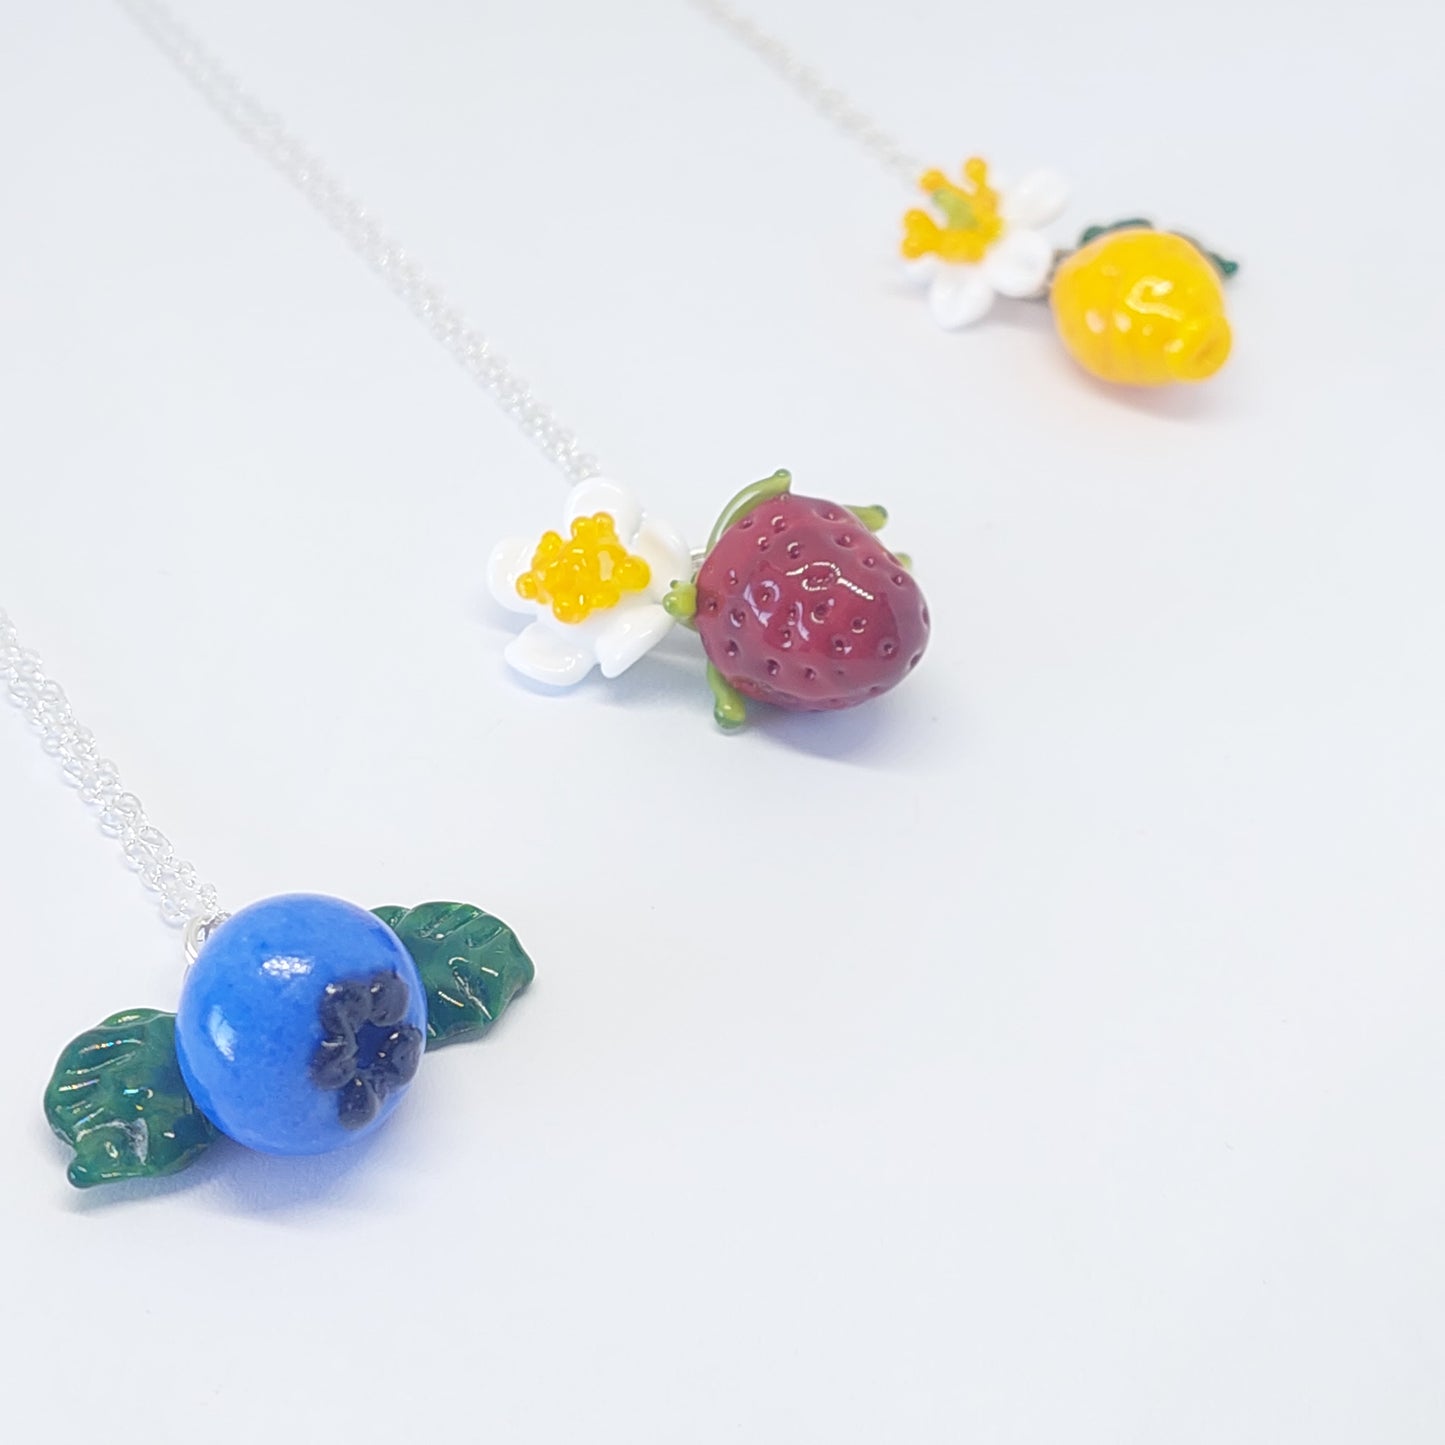 NEW!! Glass Art - Large Strawberry Cluster Necklace